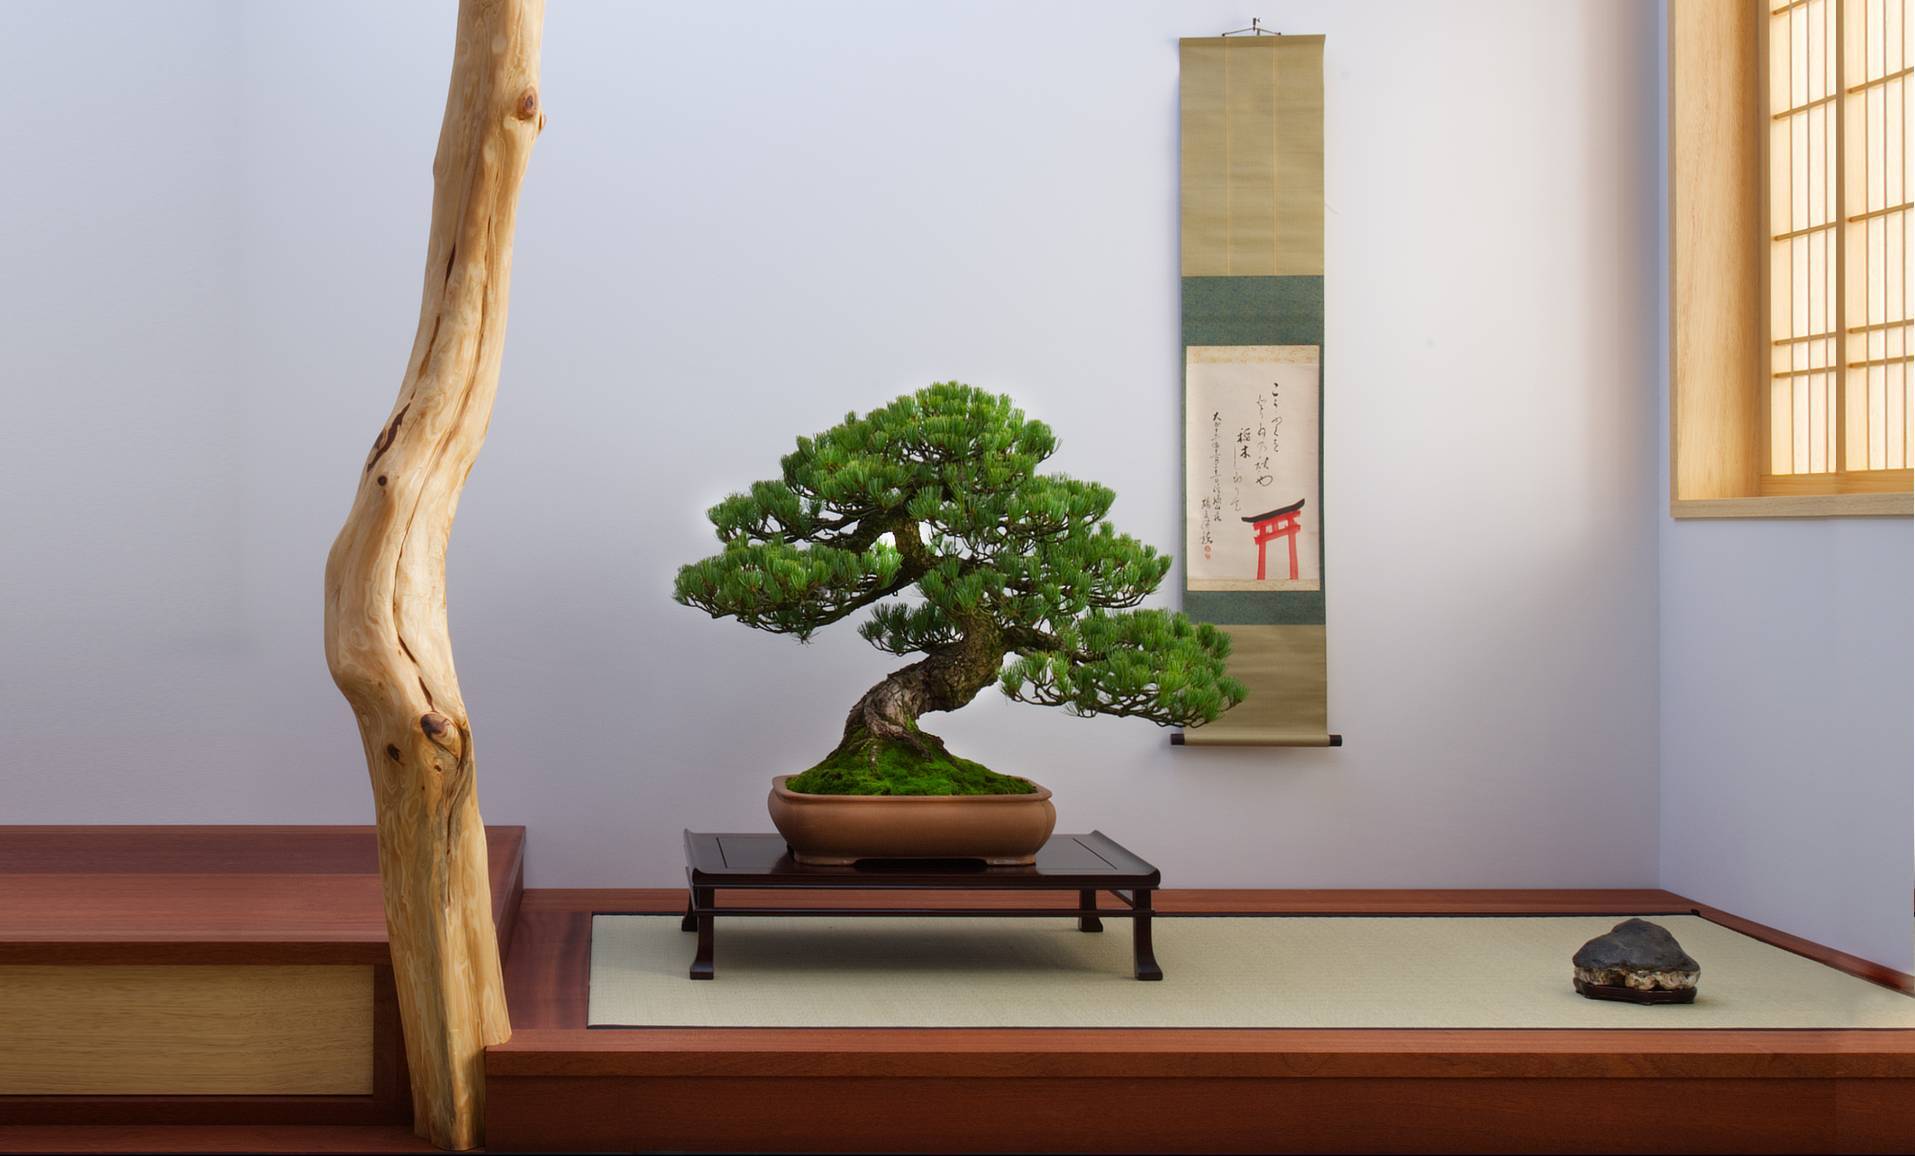 Discover the freshly arrived bonsai from Japan now!